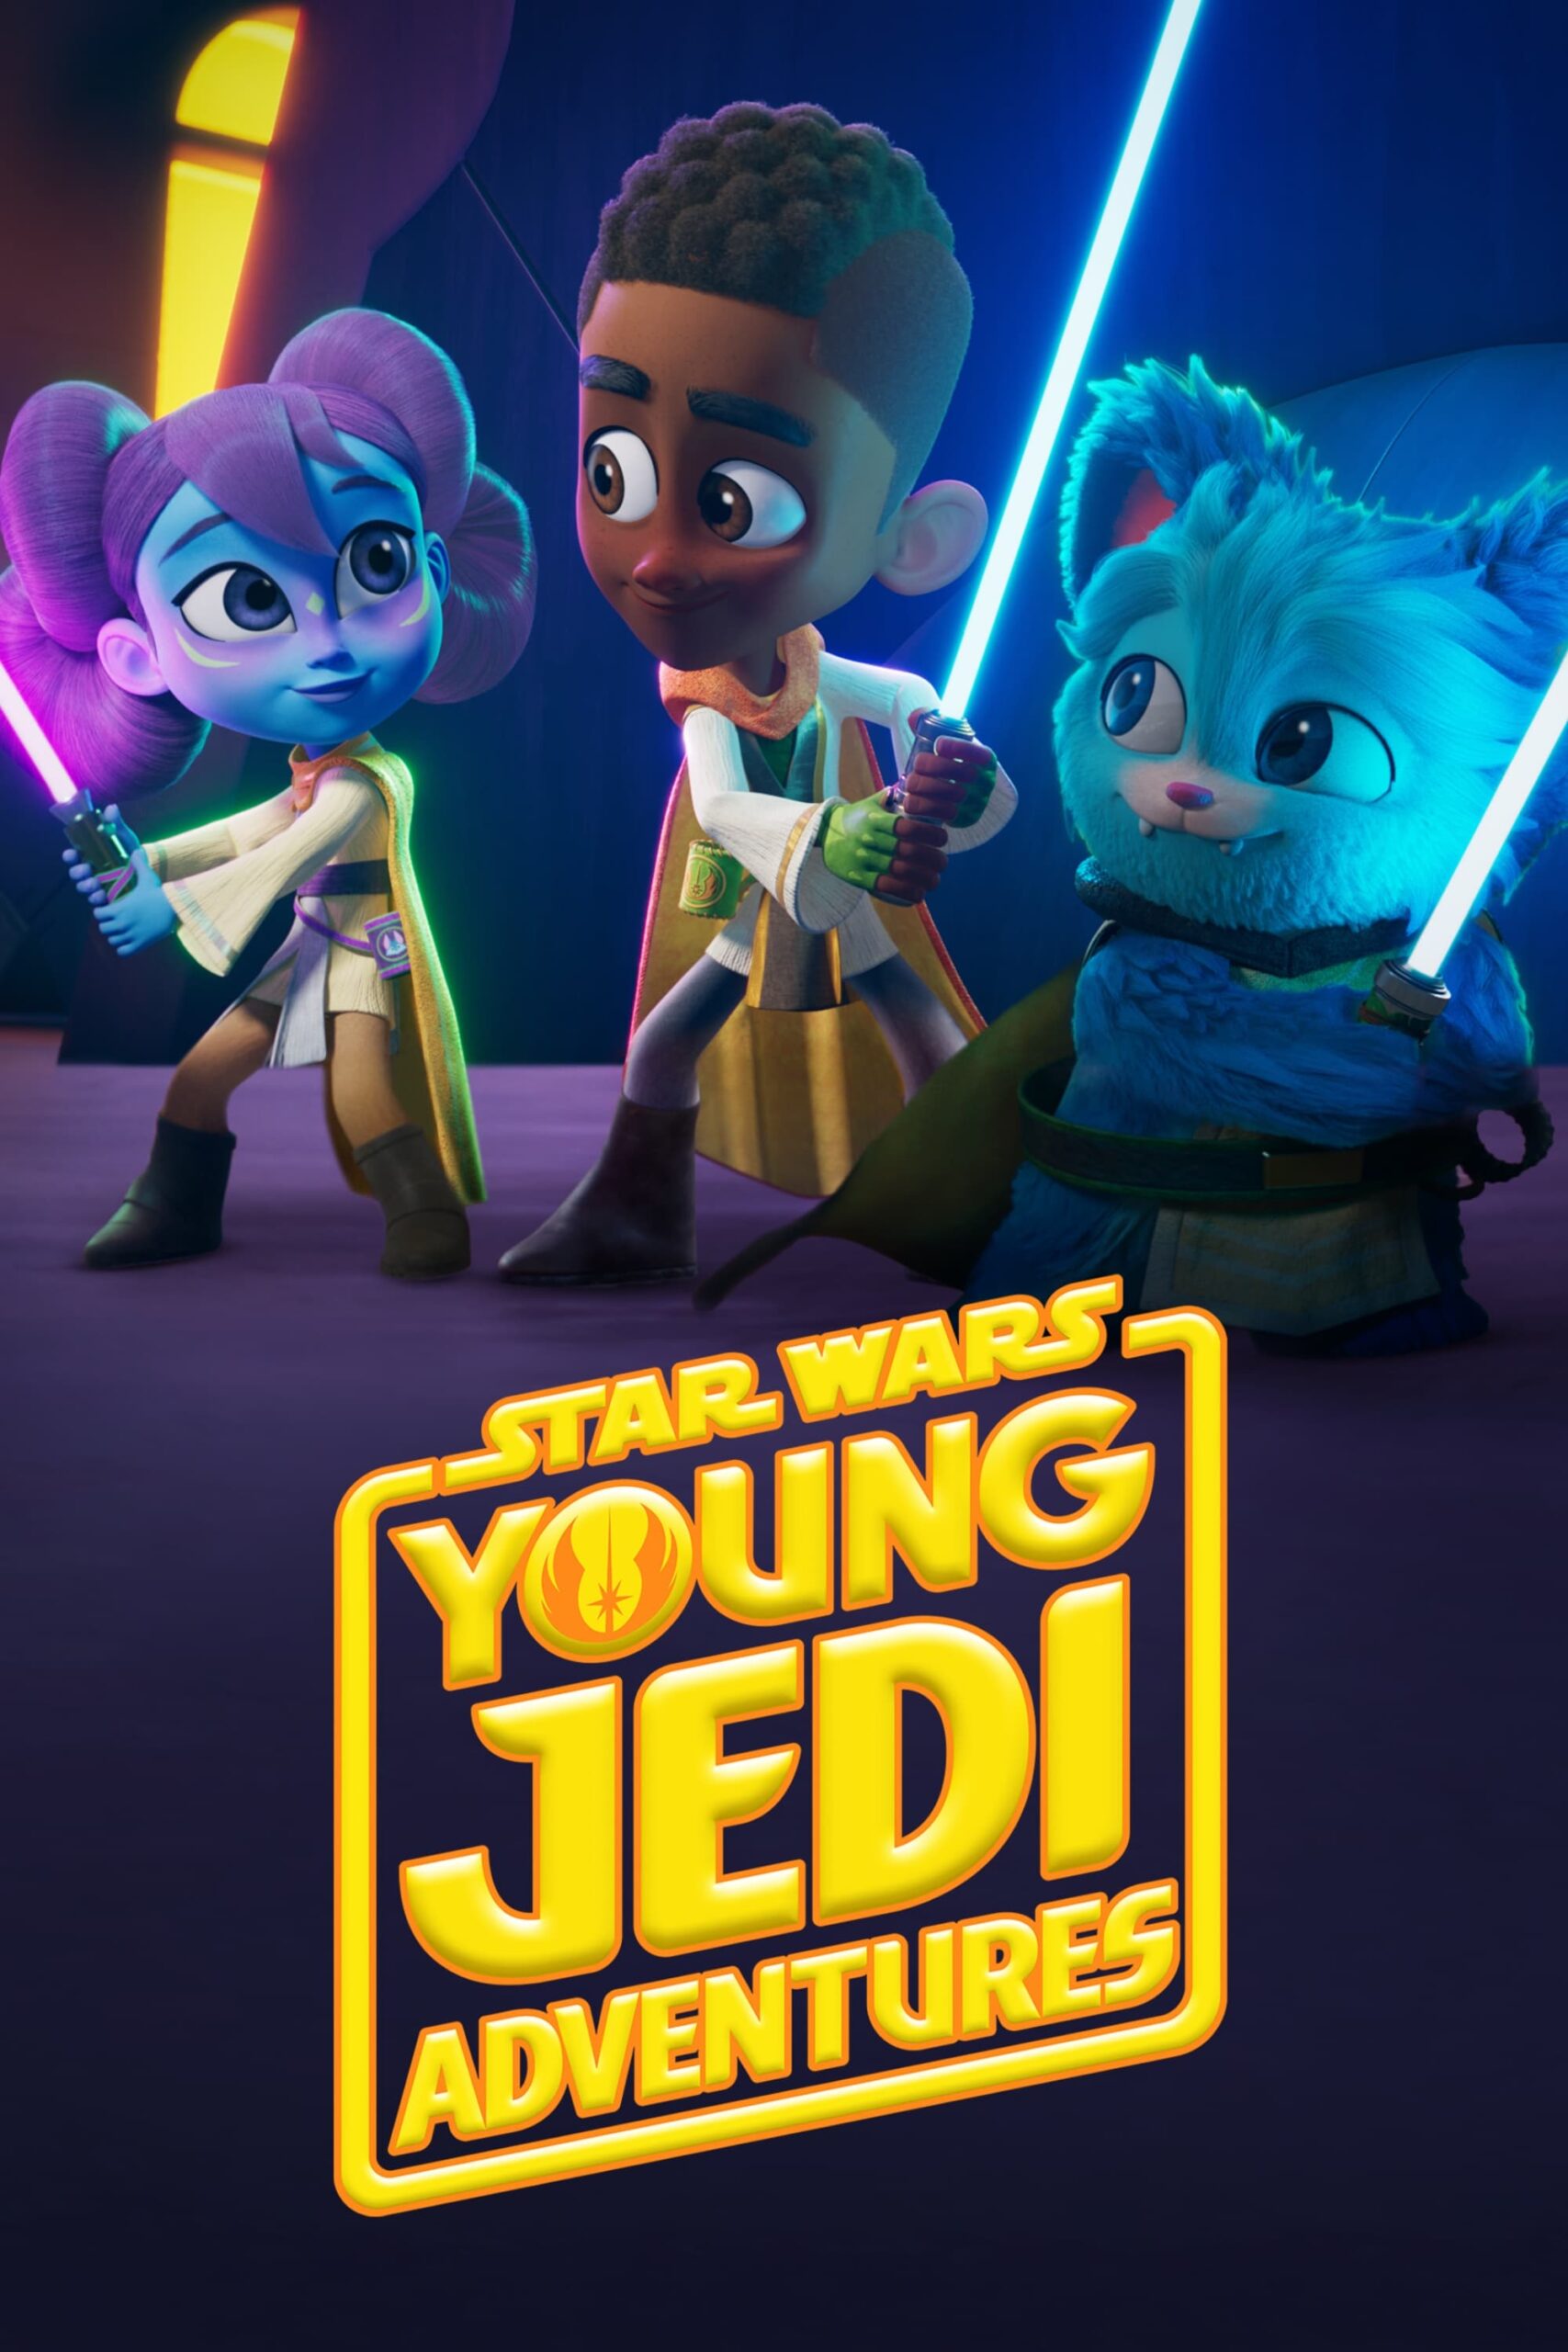 Young Jedi Adventures poster